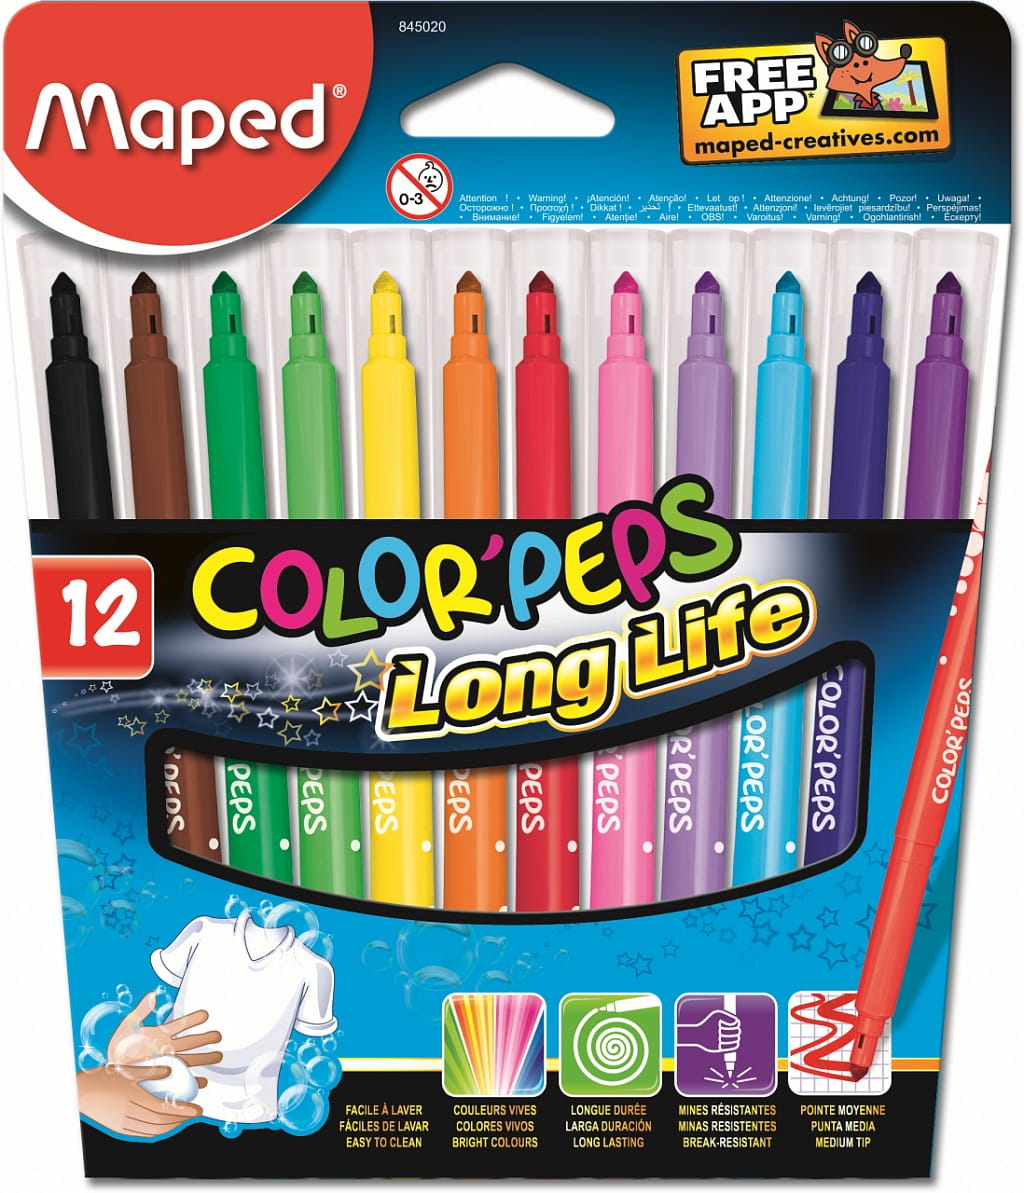   Maped Colorpeps - 12 